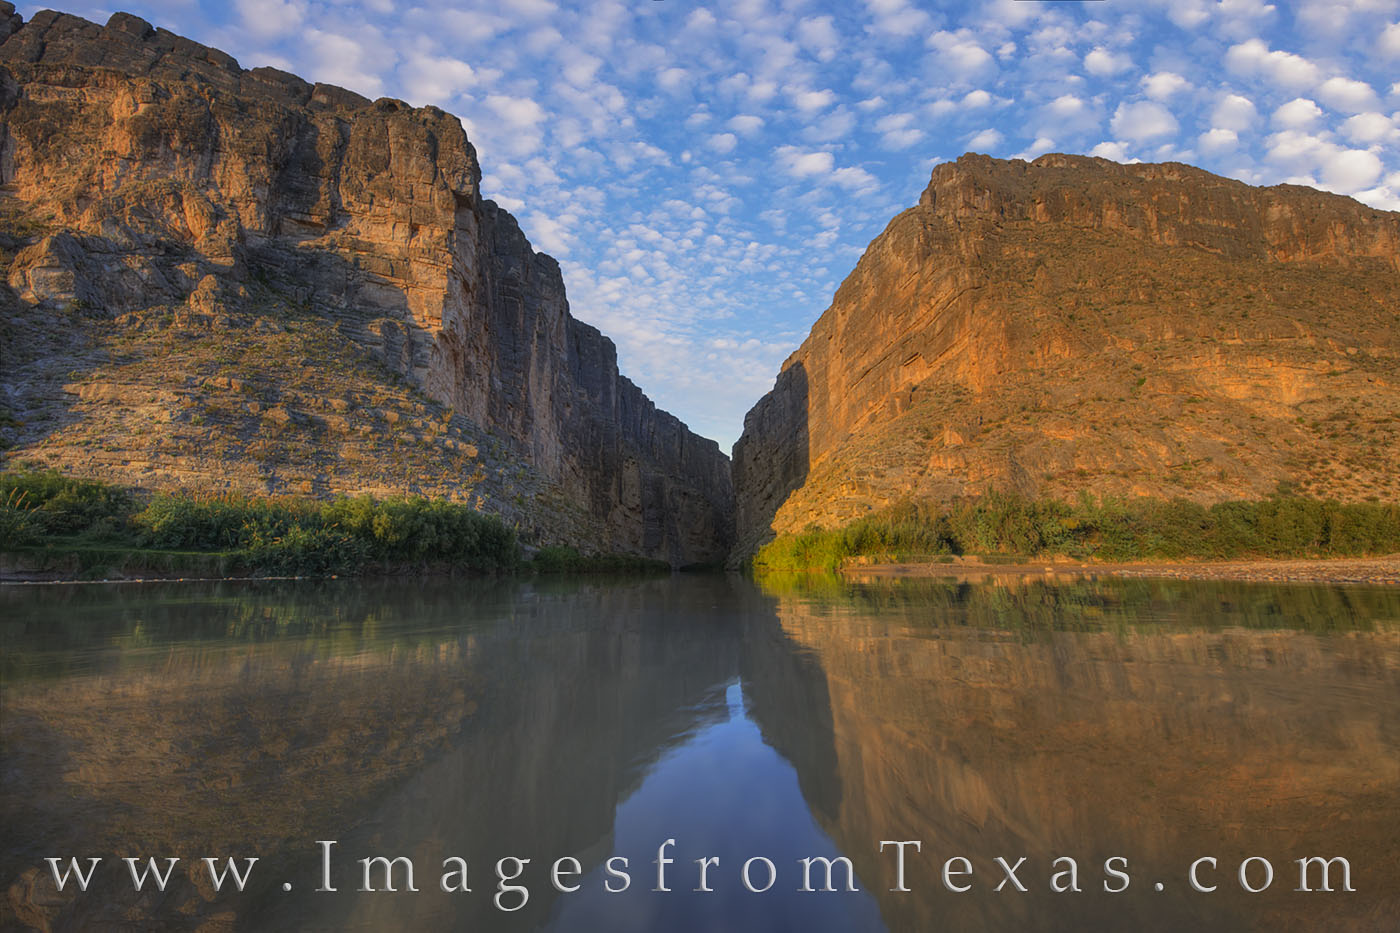 Santa Elena Canyon rises nearly 1500 feet above the Rio Grande in Big Bend National Park. On the south side is Mexico; on the...